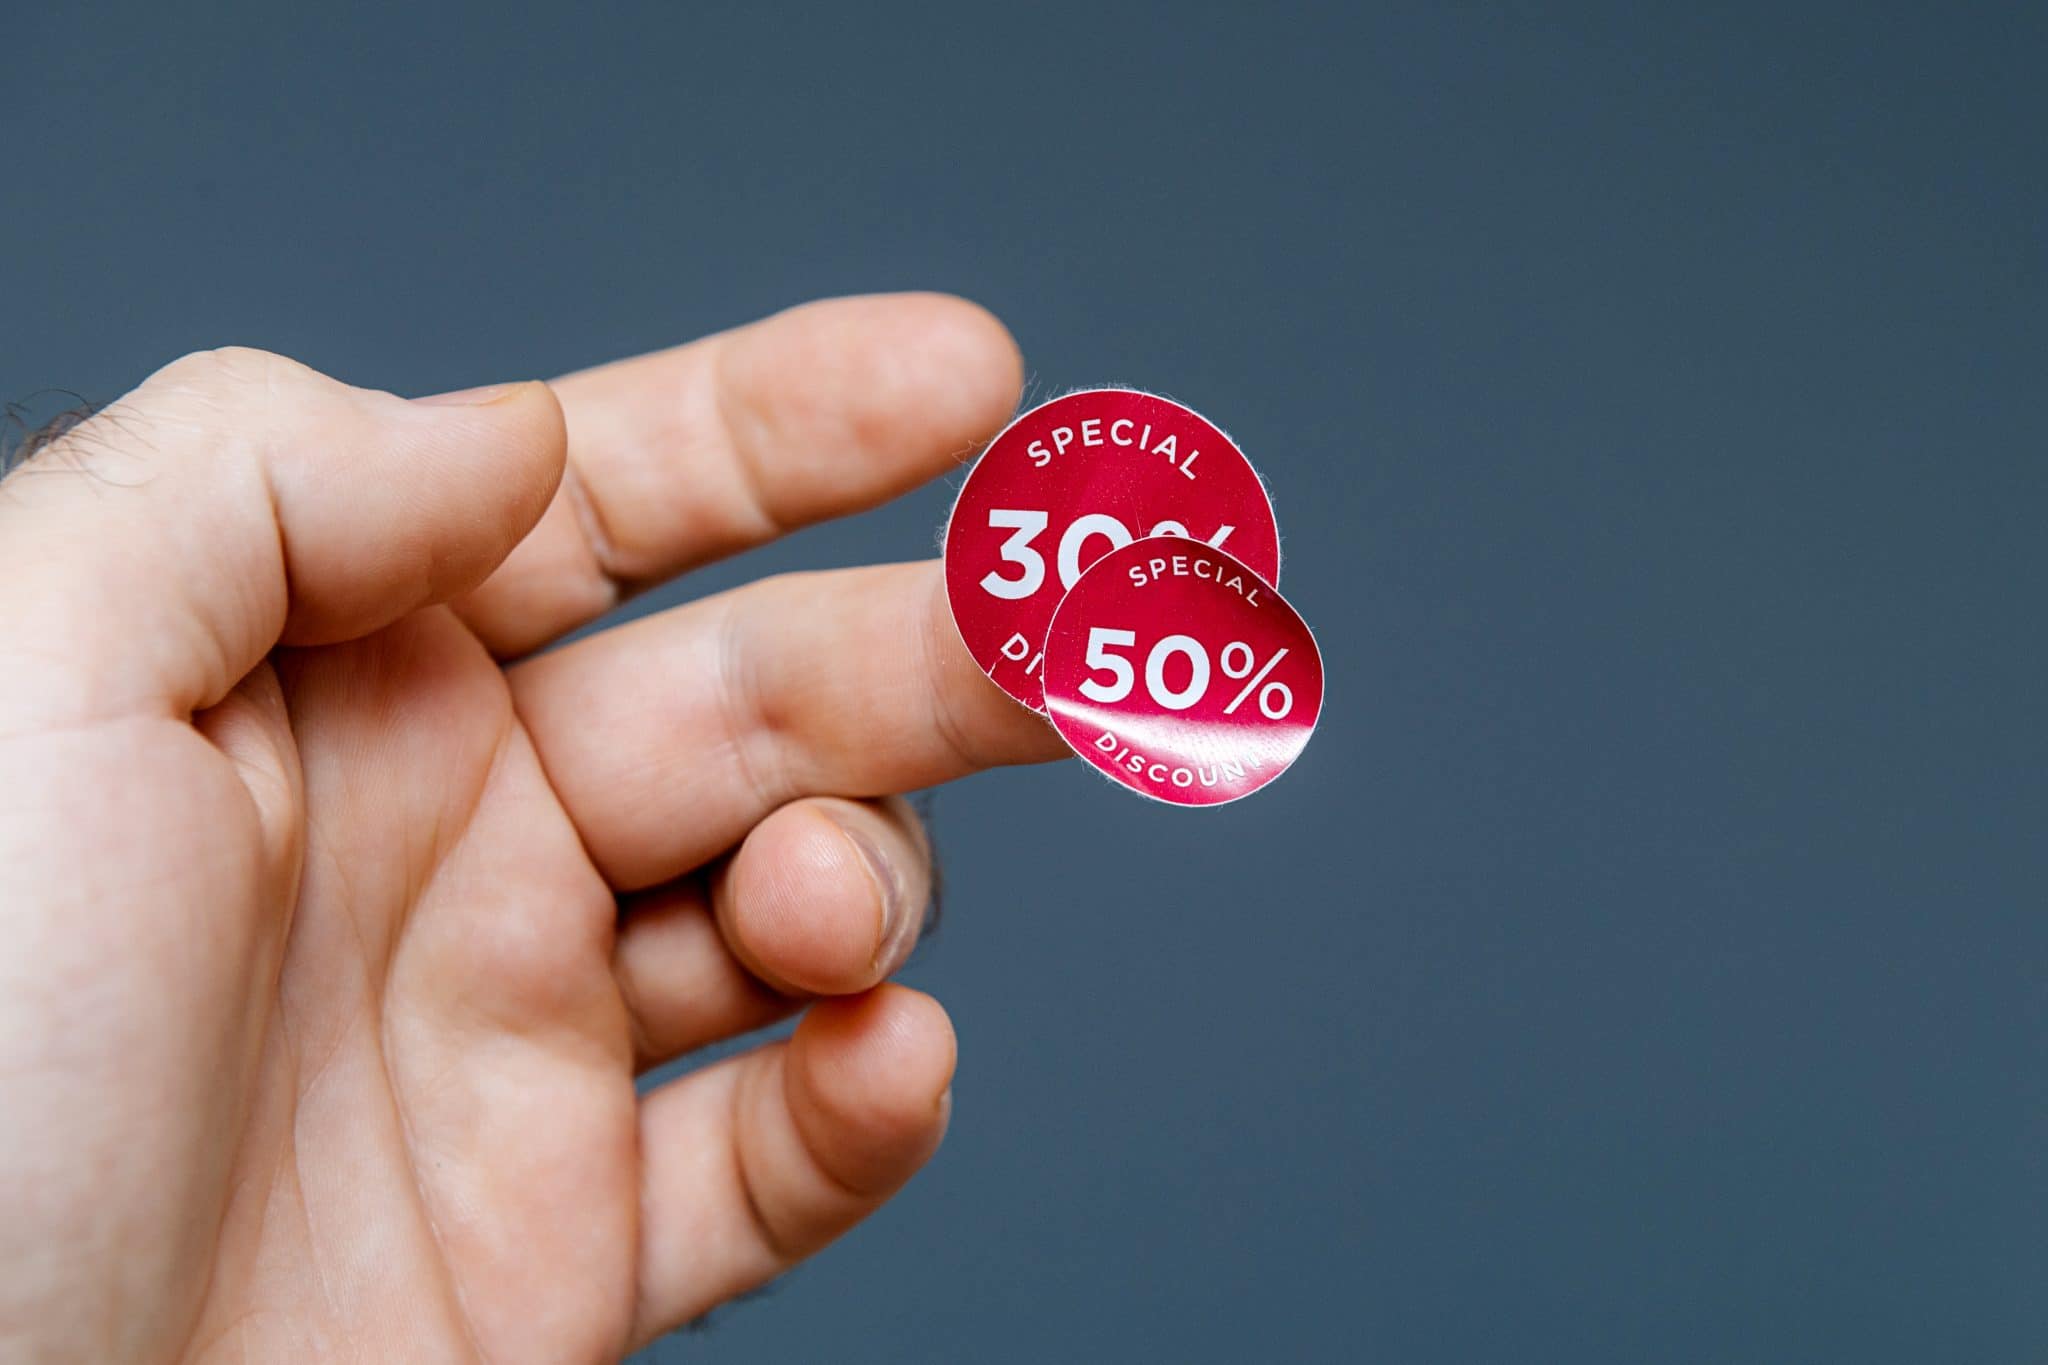 30mm Bright Red Reduced To Clear Sale Price Stickers Sticky Swing Tag Labels 